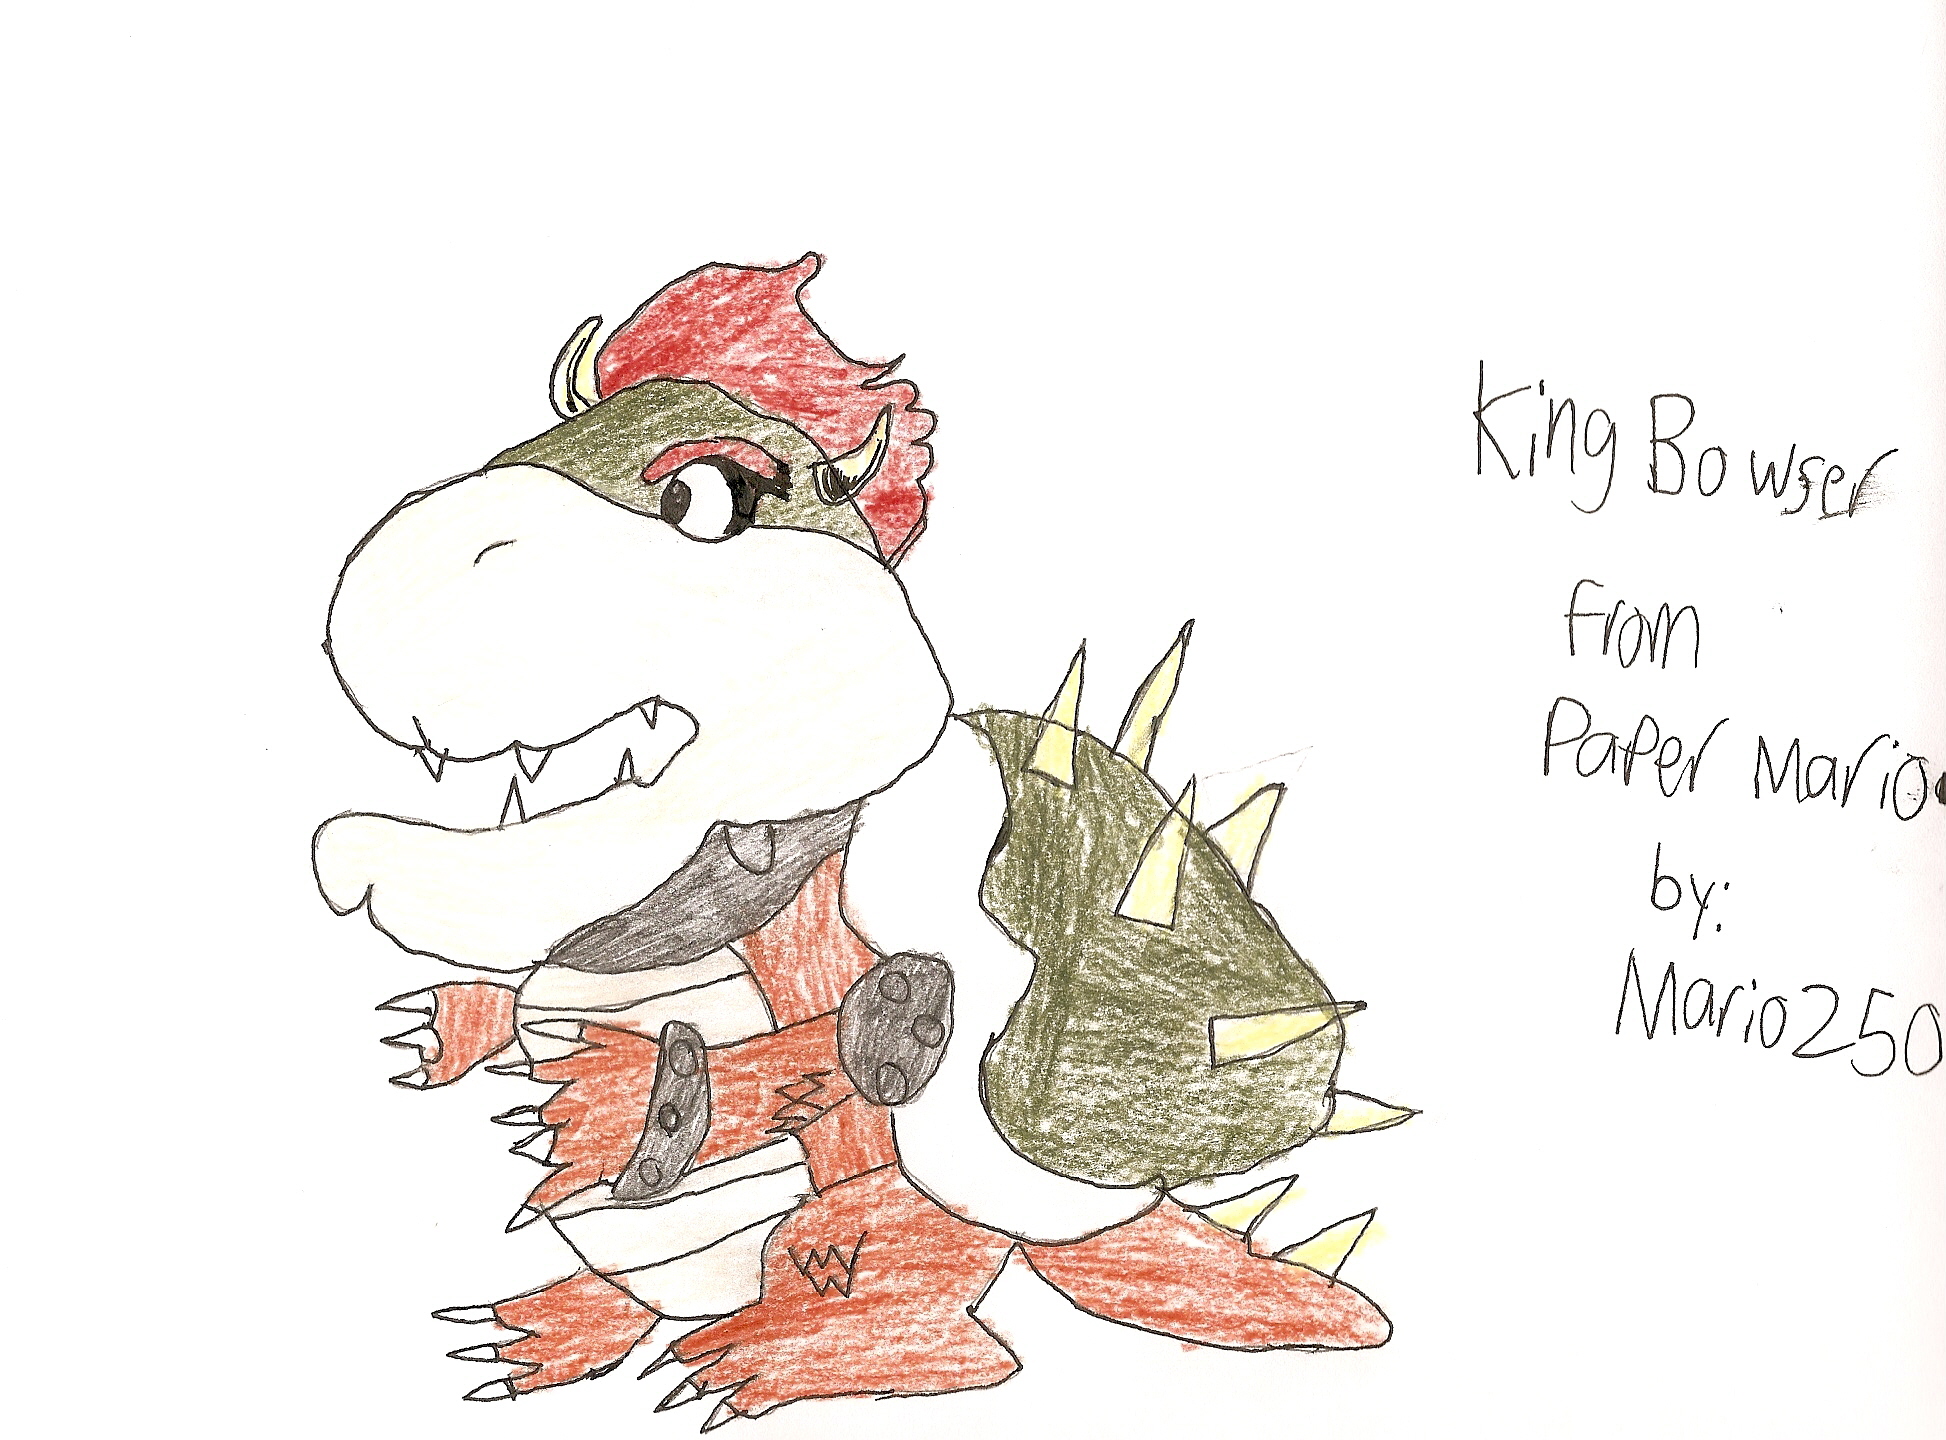 King Bowser by Mario250